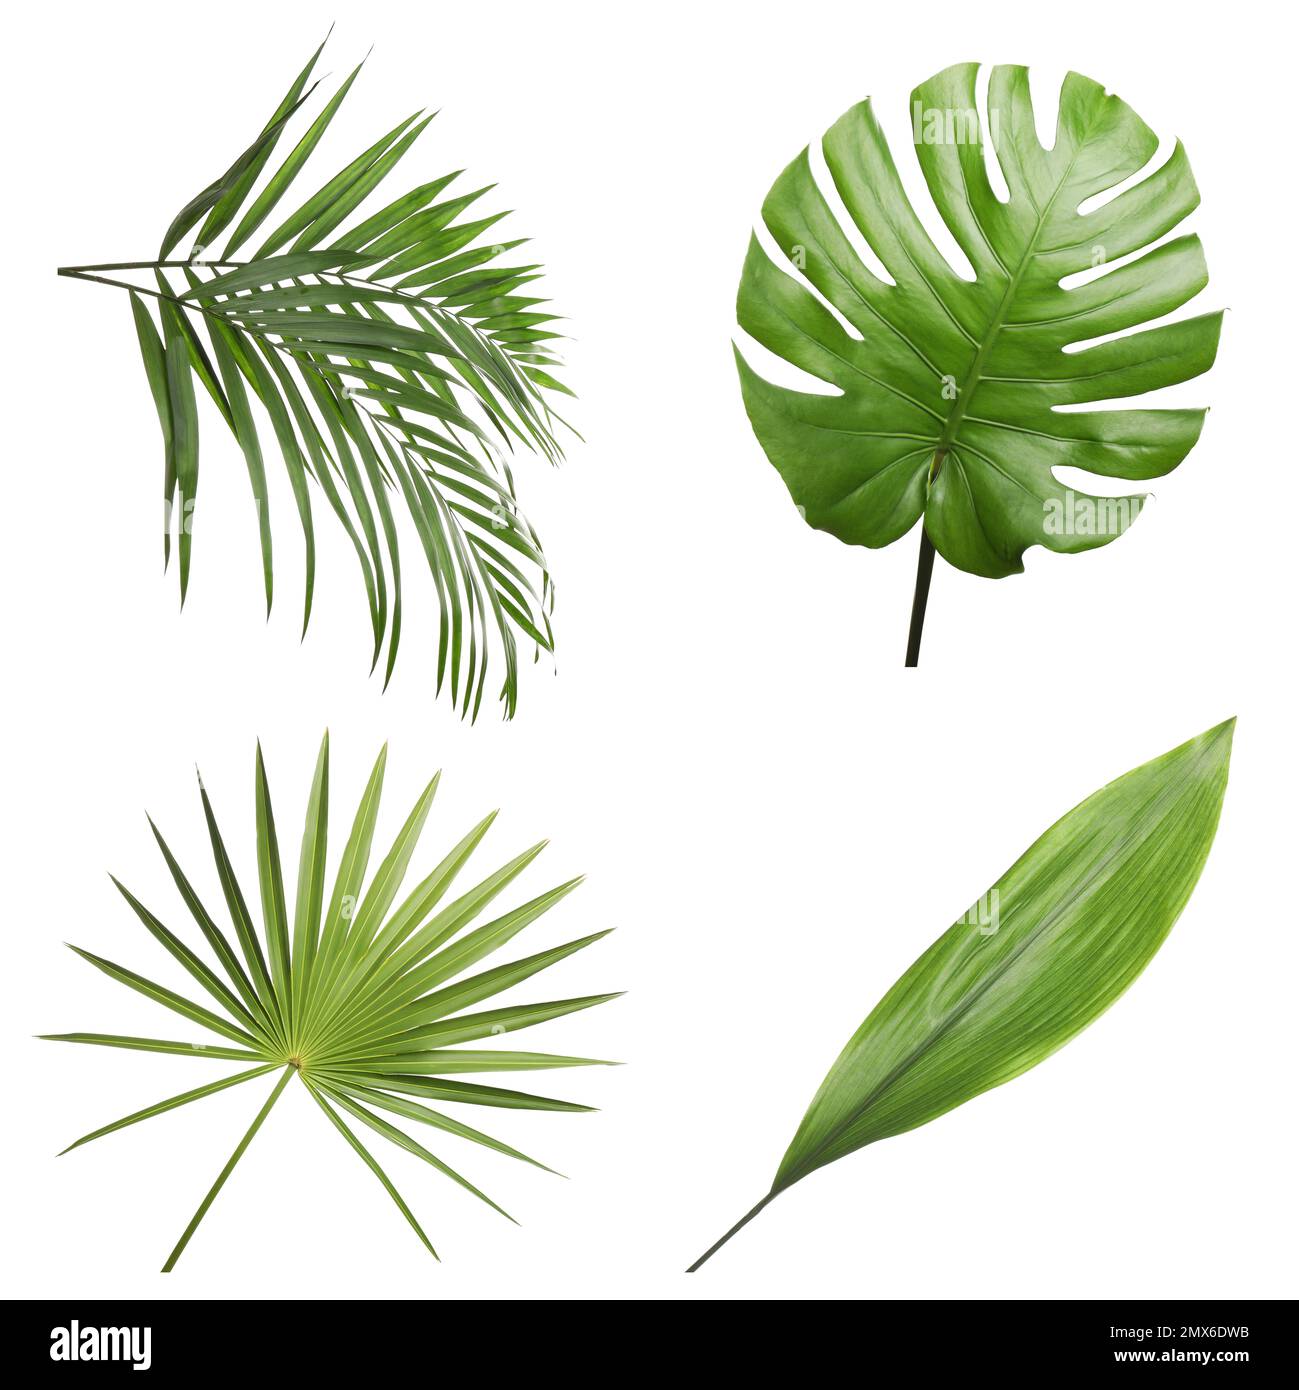 Set of different fresh tropical leaves on white background Stock Photo